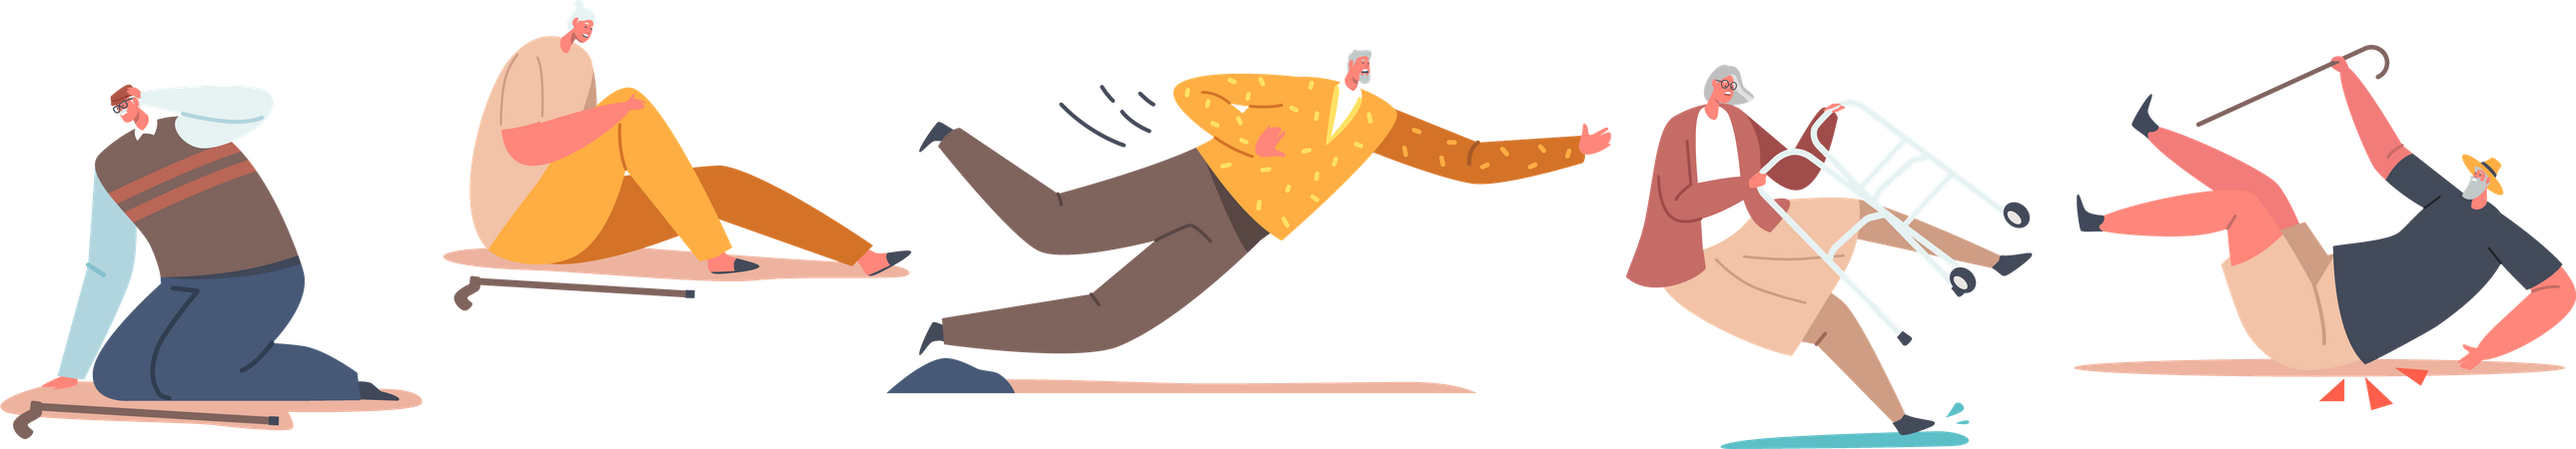 Senior people Falling Down on the Ground due to Slippery Road Illustration